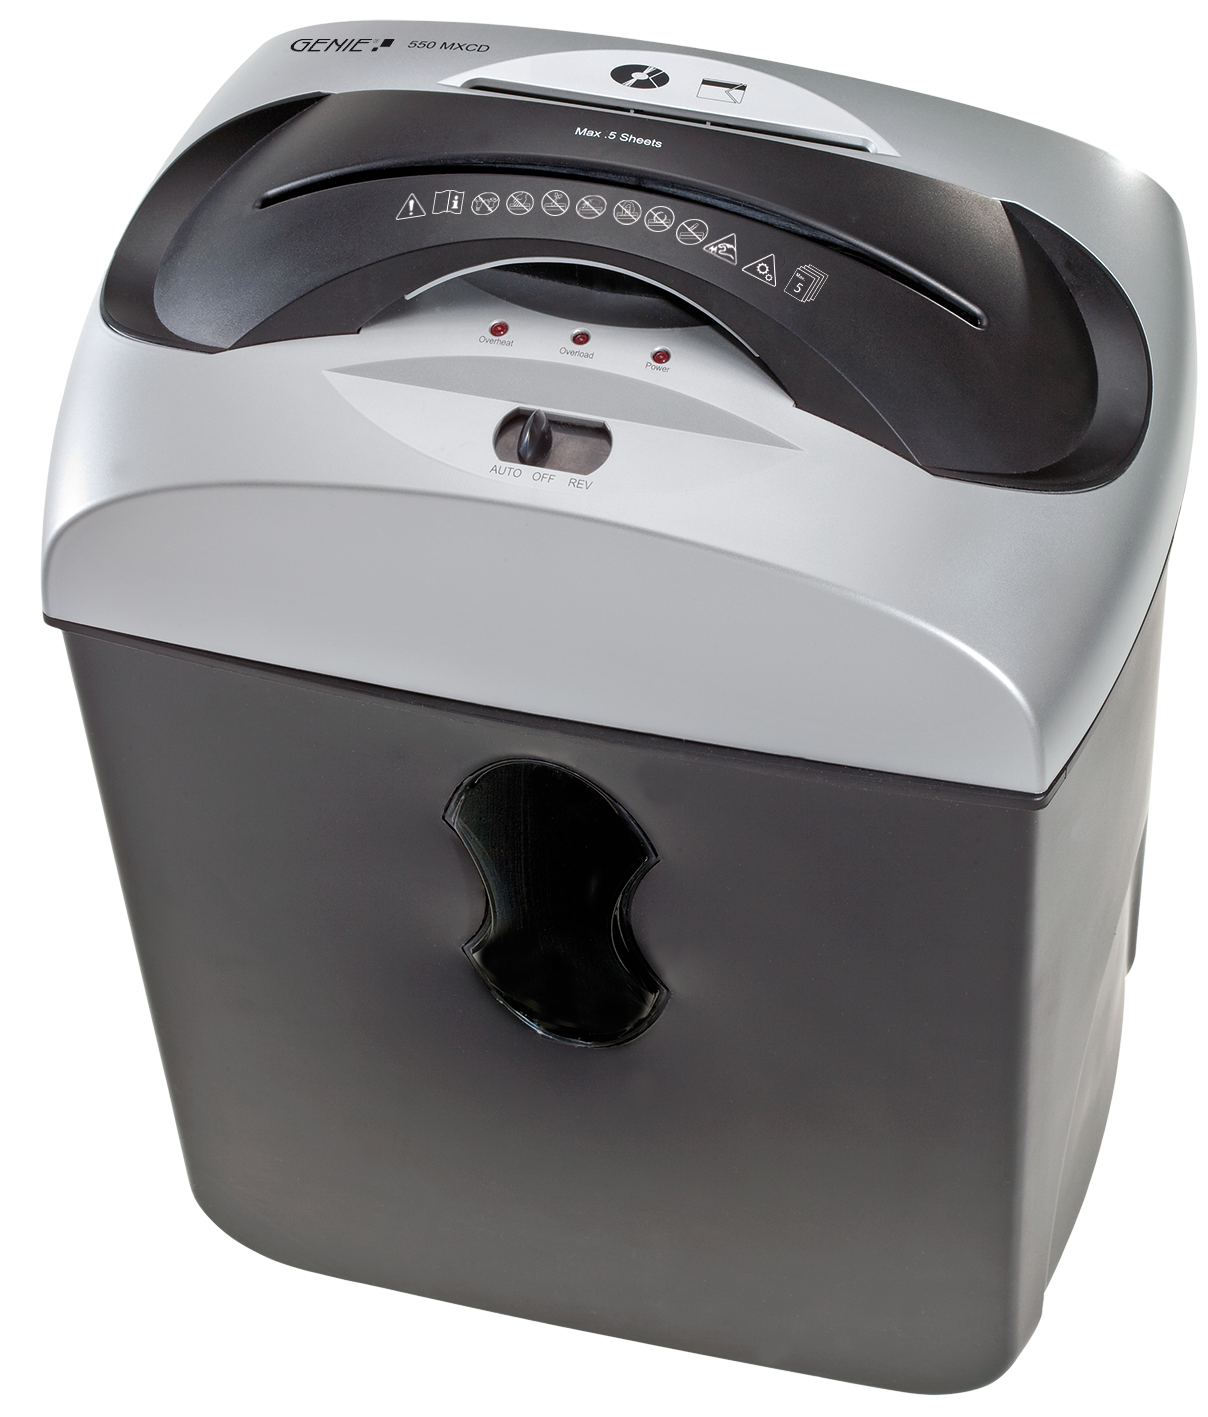 Papershredder, 5 sheets micro cut and CD shredder